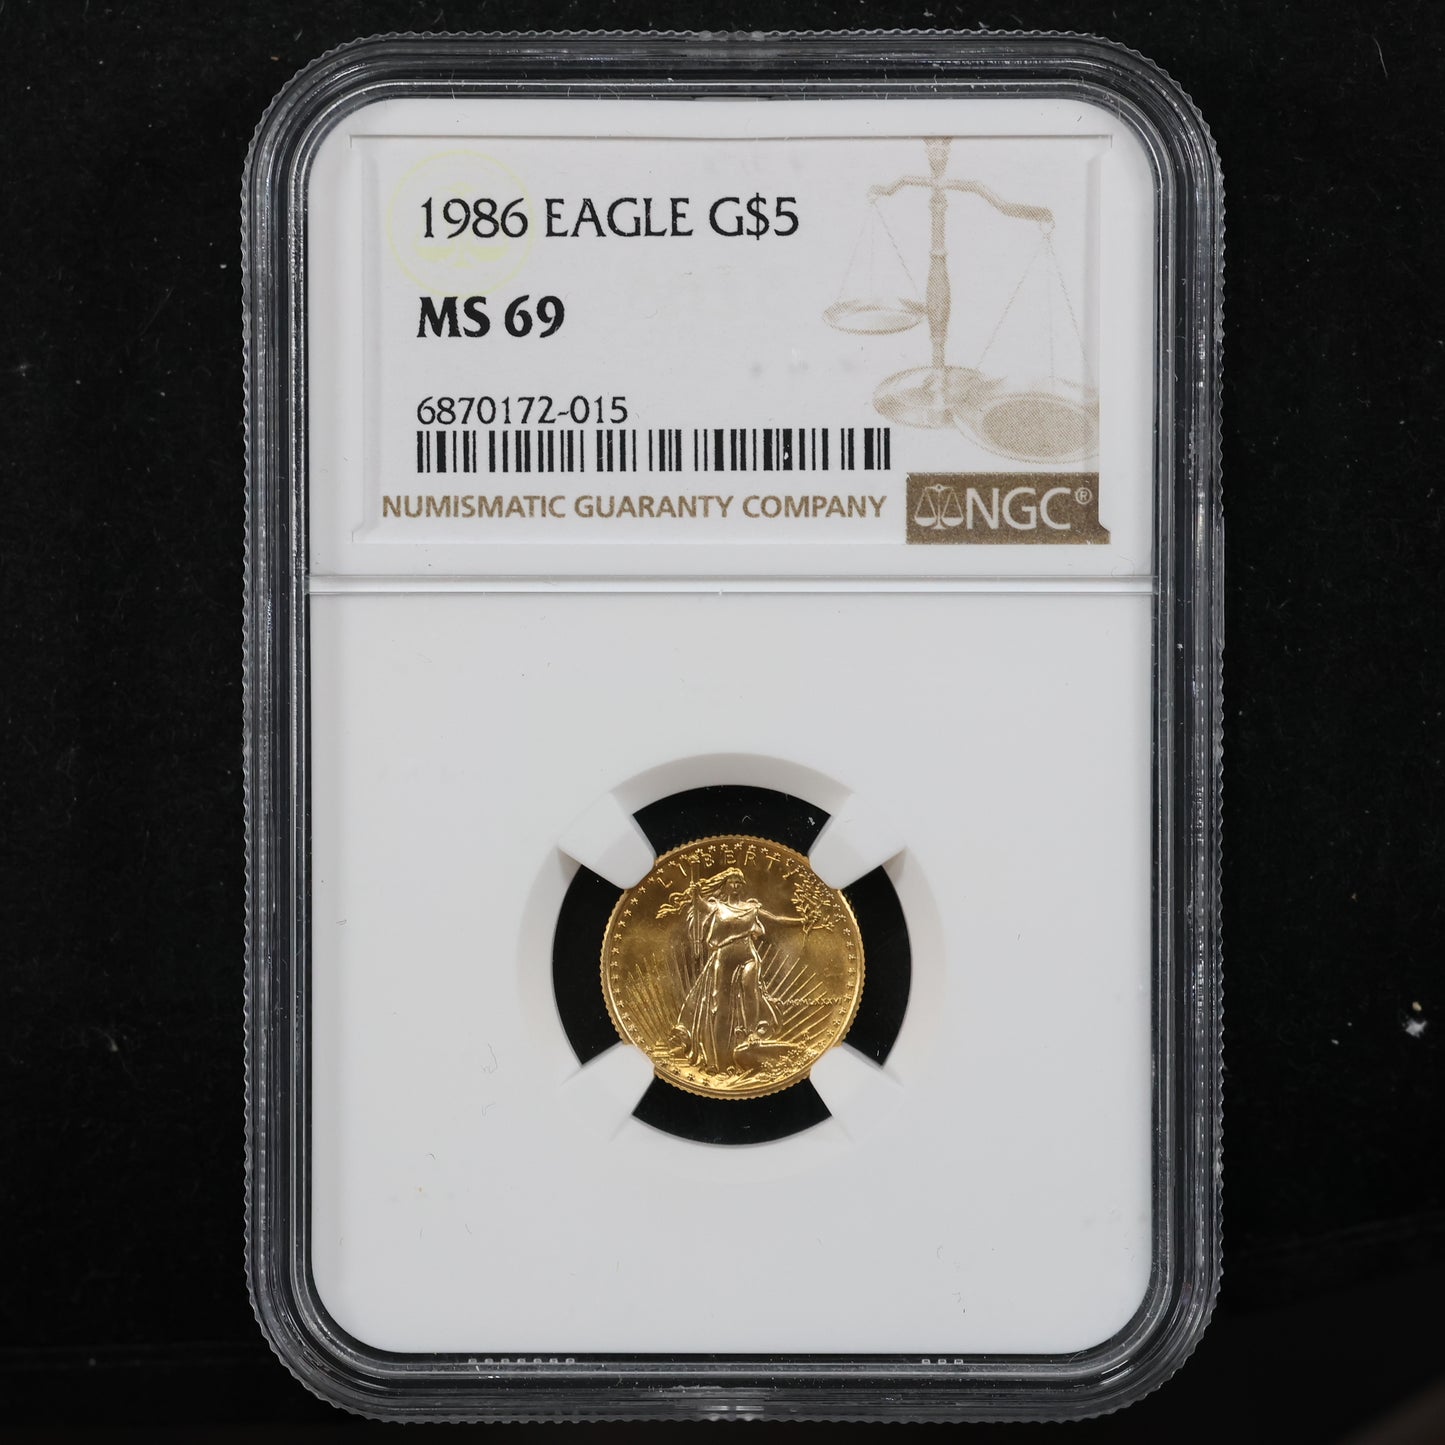 1986 1/10 oz Gold American Eagle 5$ Bullion Gold Coin - NGC MS 69